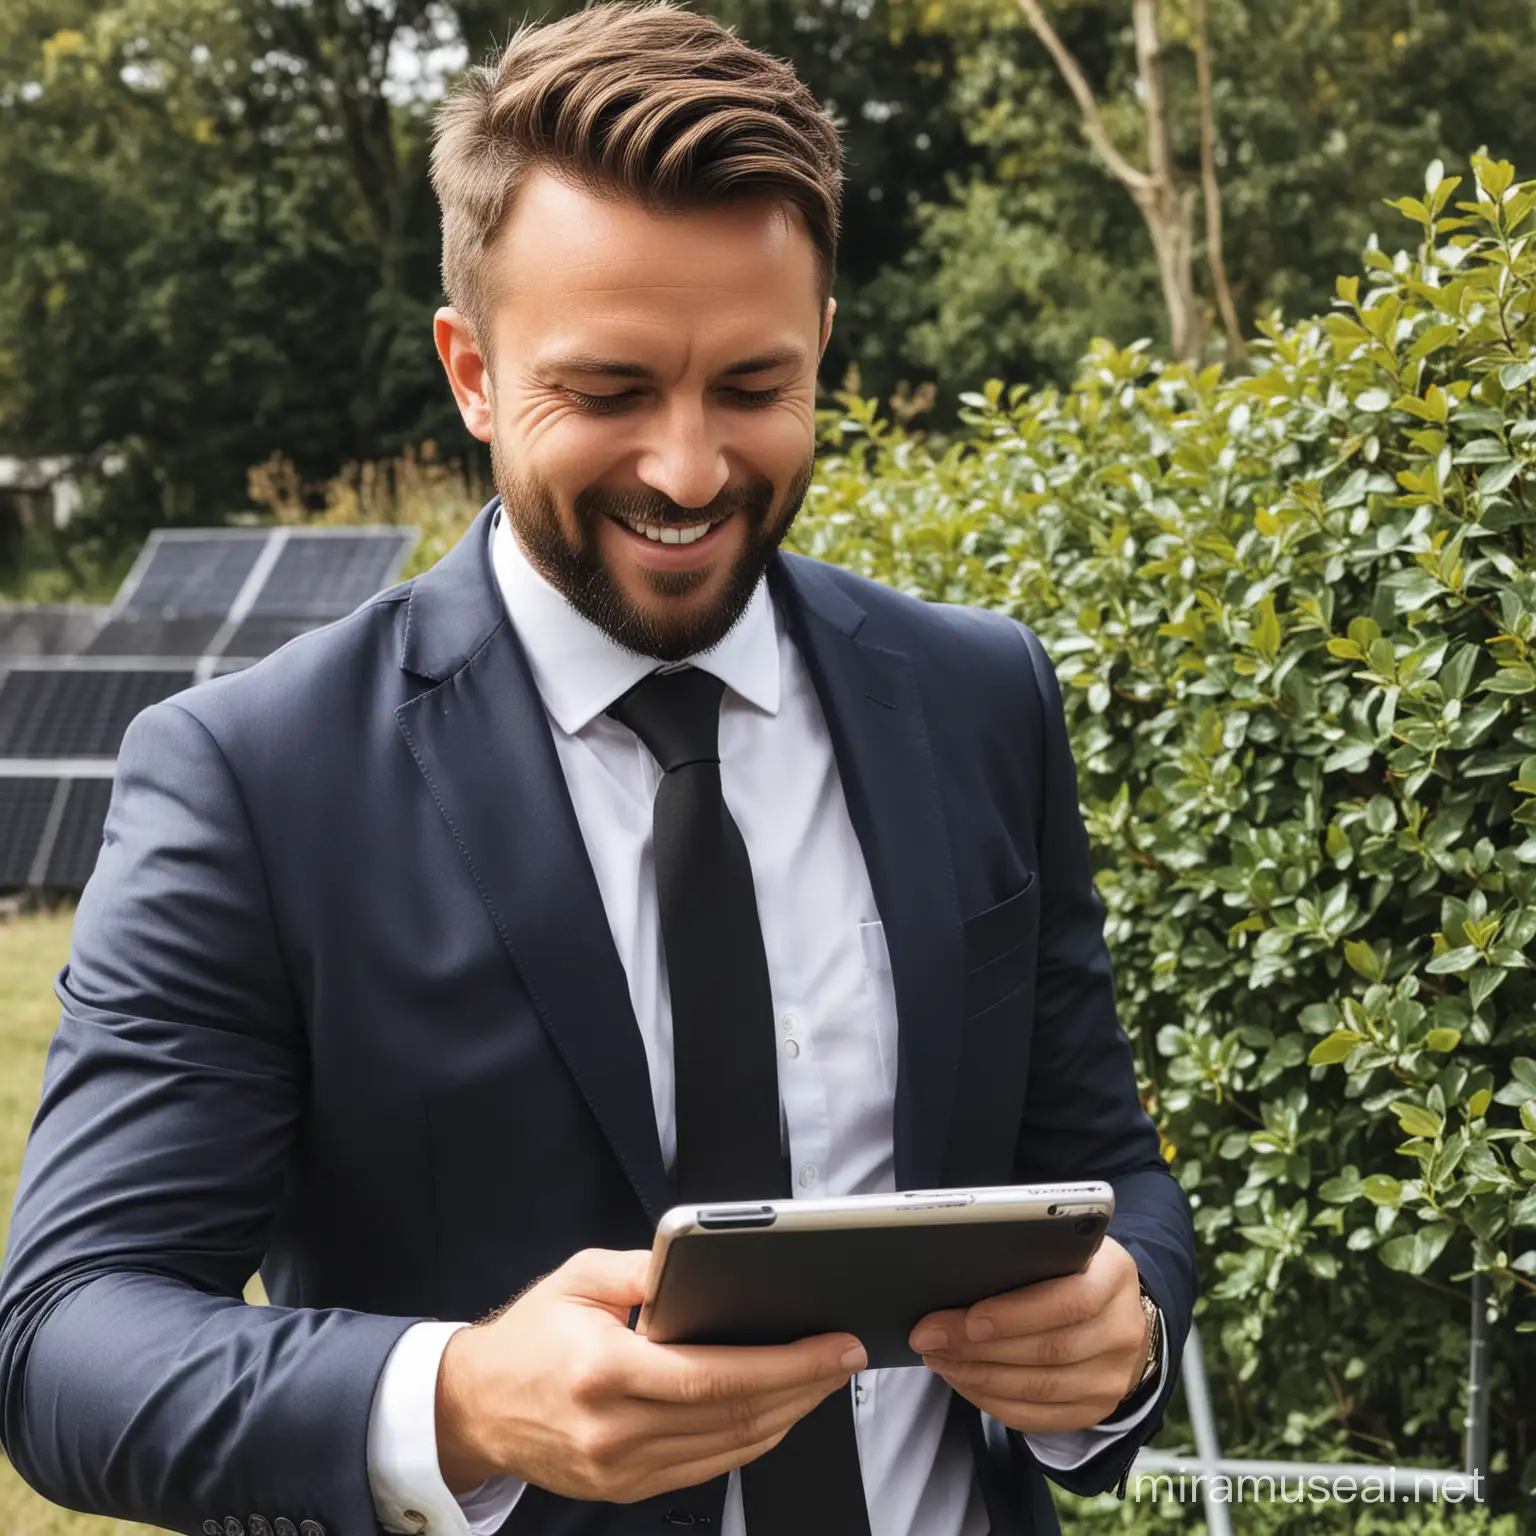 Solar sales manager creating engaging social media content
